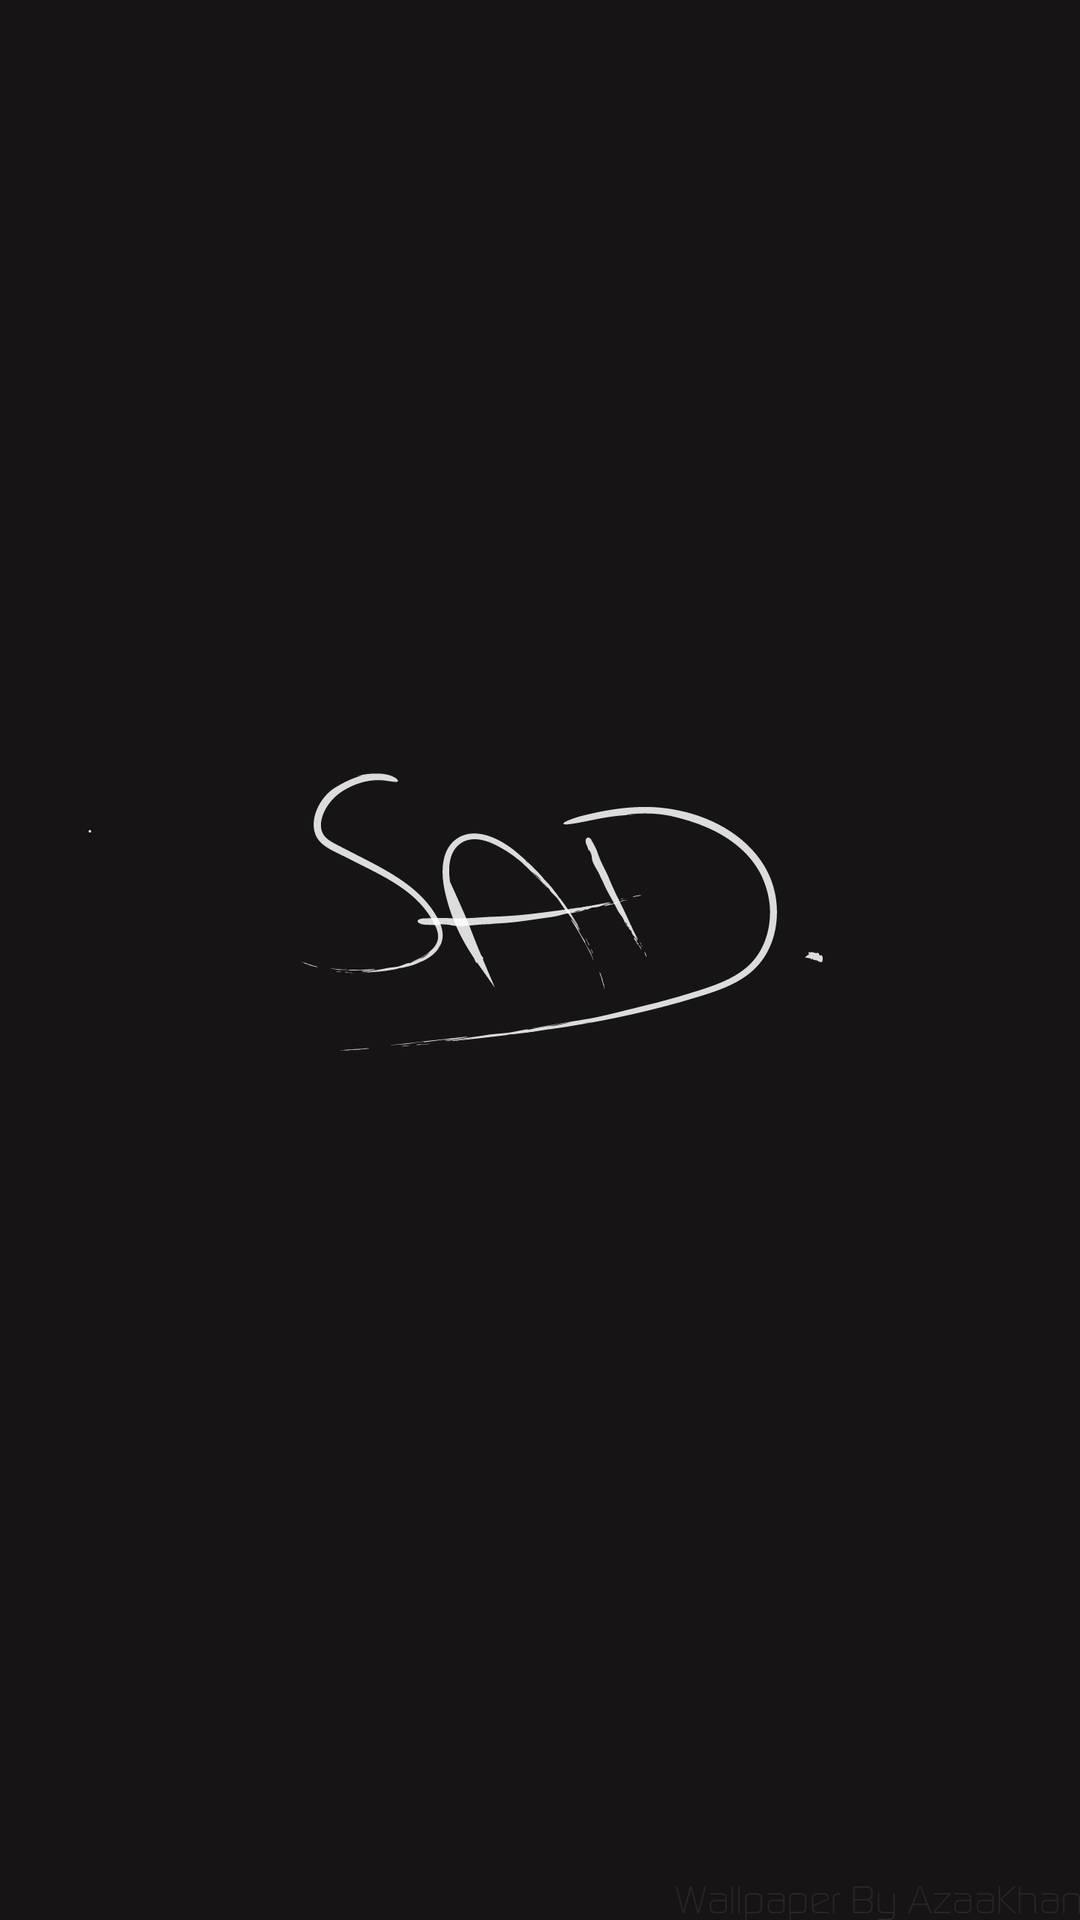 Sad 1440X2560 Wallpaper and Background Image